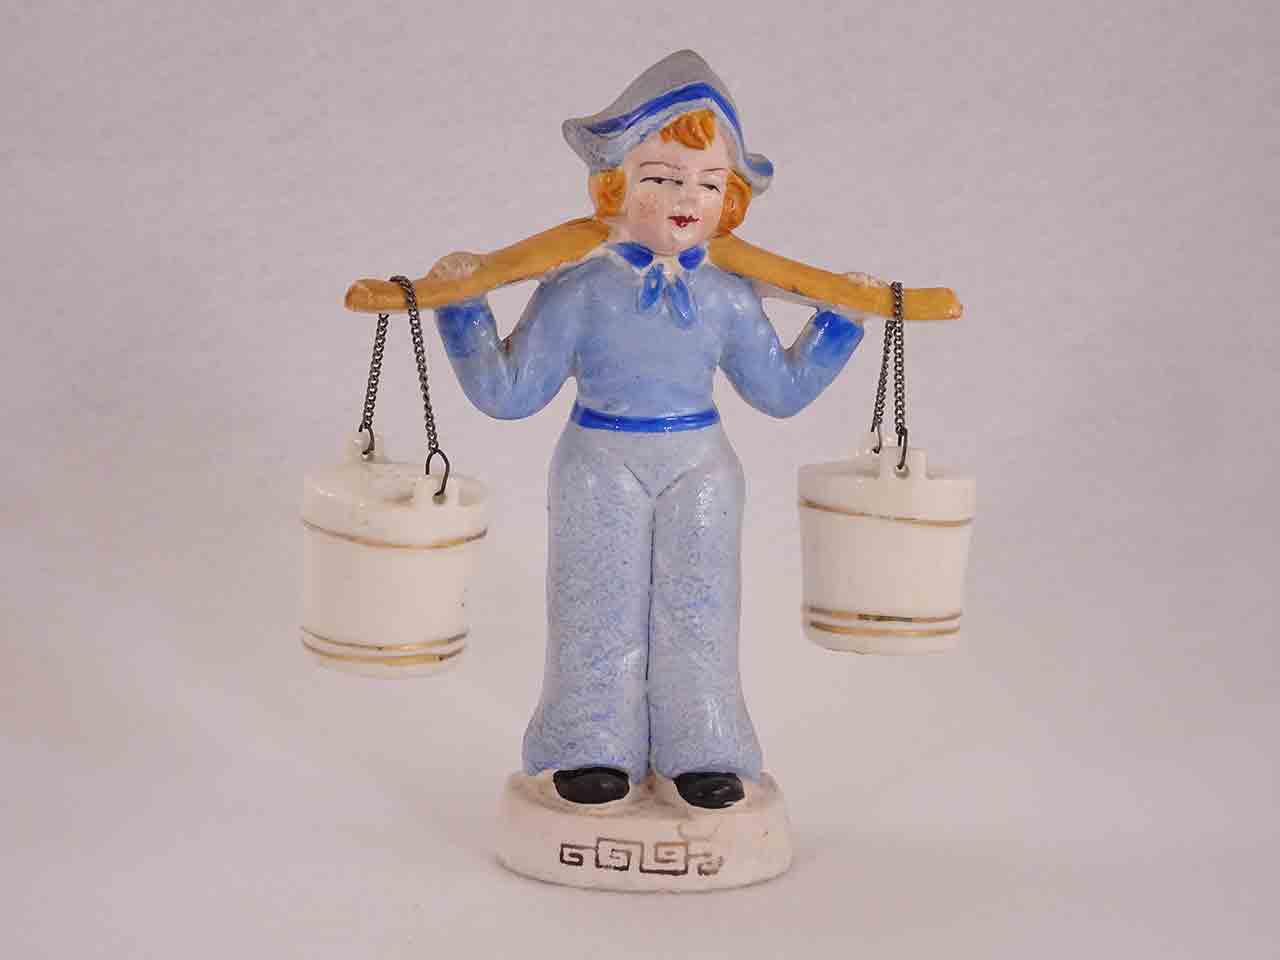 Occupied Japan Dutch / Holland girl carrying water buckets / pails - hanger salt and pepper shakers